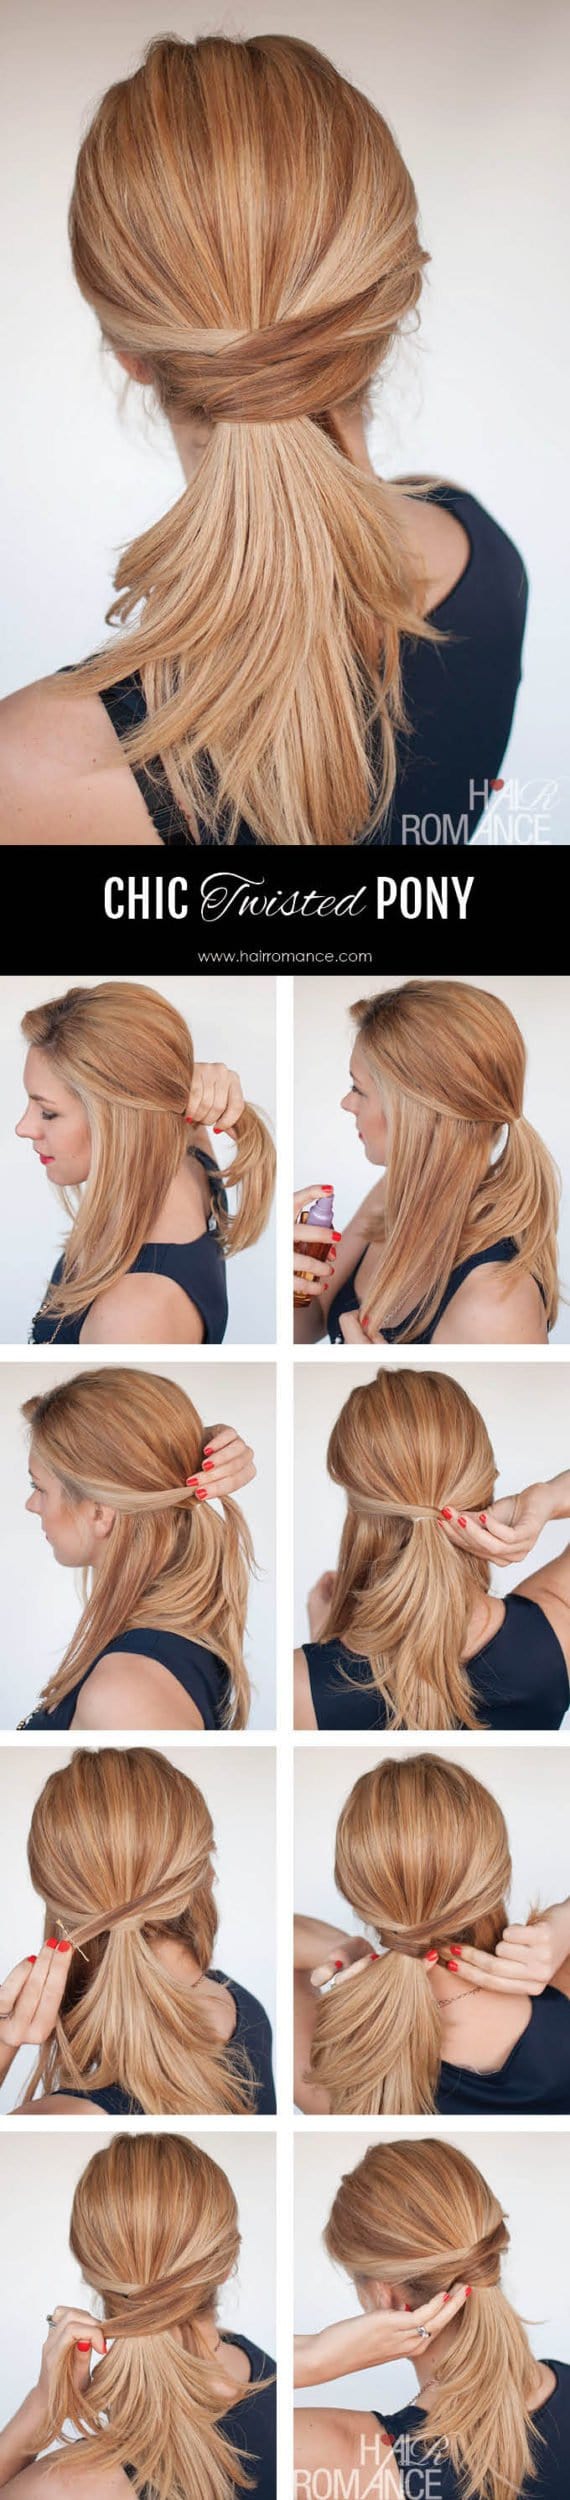 Easy Step By Step Hairstyle Tutorials You Can Do For Less Than 5